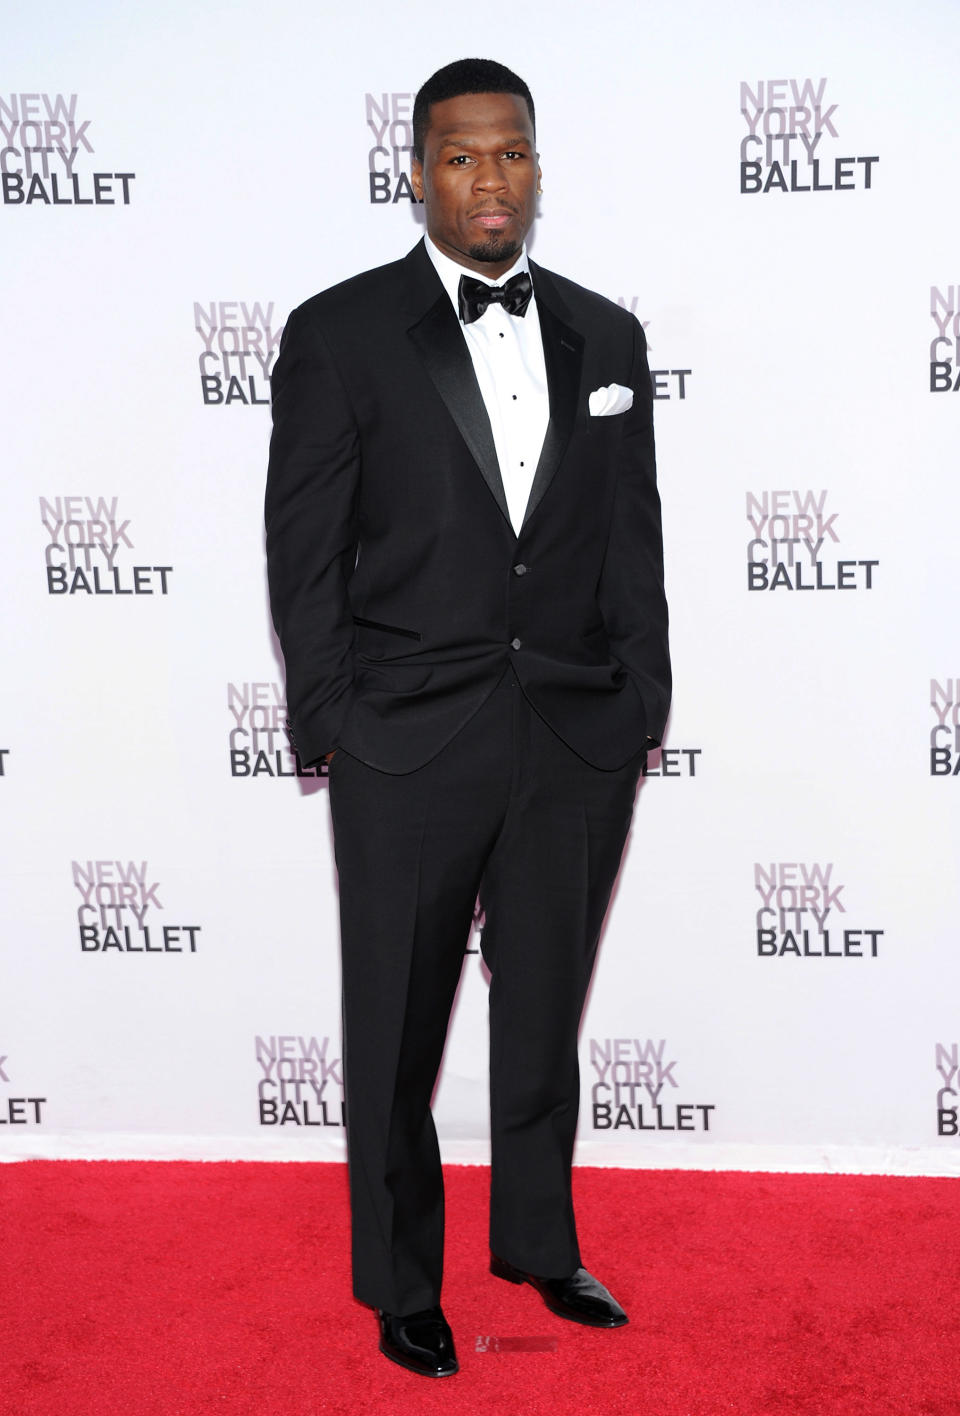 FILE - In this Sept. 19, 2013 file photo, Curtis "50 Cent" Jackson attends the New York City Ballet 2013 Fall gala at Lincoln Center, in New York. The rapper said he’s excited to be a part of the new Sundance series “Dream School” because the reality show focuses on uplifting people. The show, which debuted Monday, Oct. 7, 2013, follows a group of high school dropouts who are trying to graduate. (Photo by Evan Agostini/Invision/AP, File)